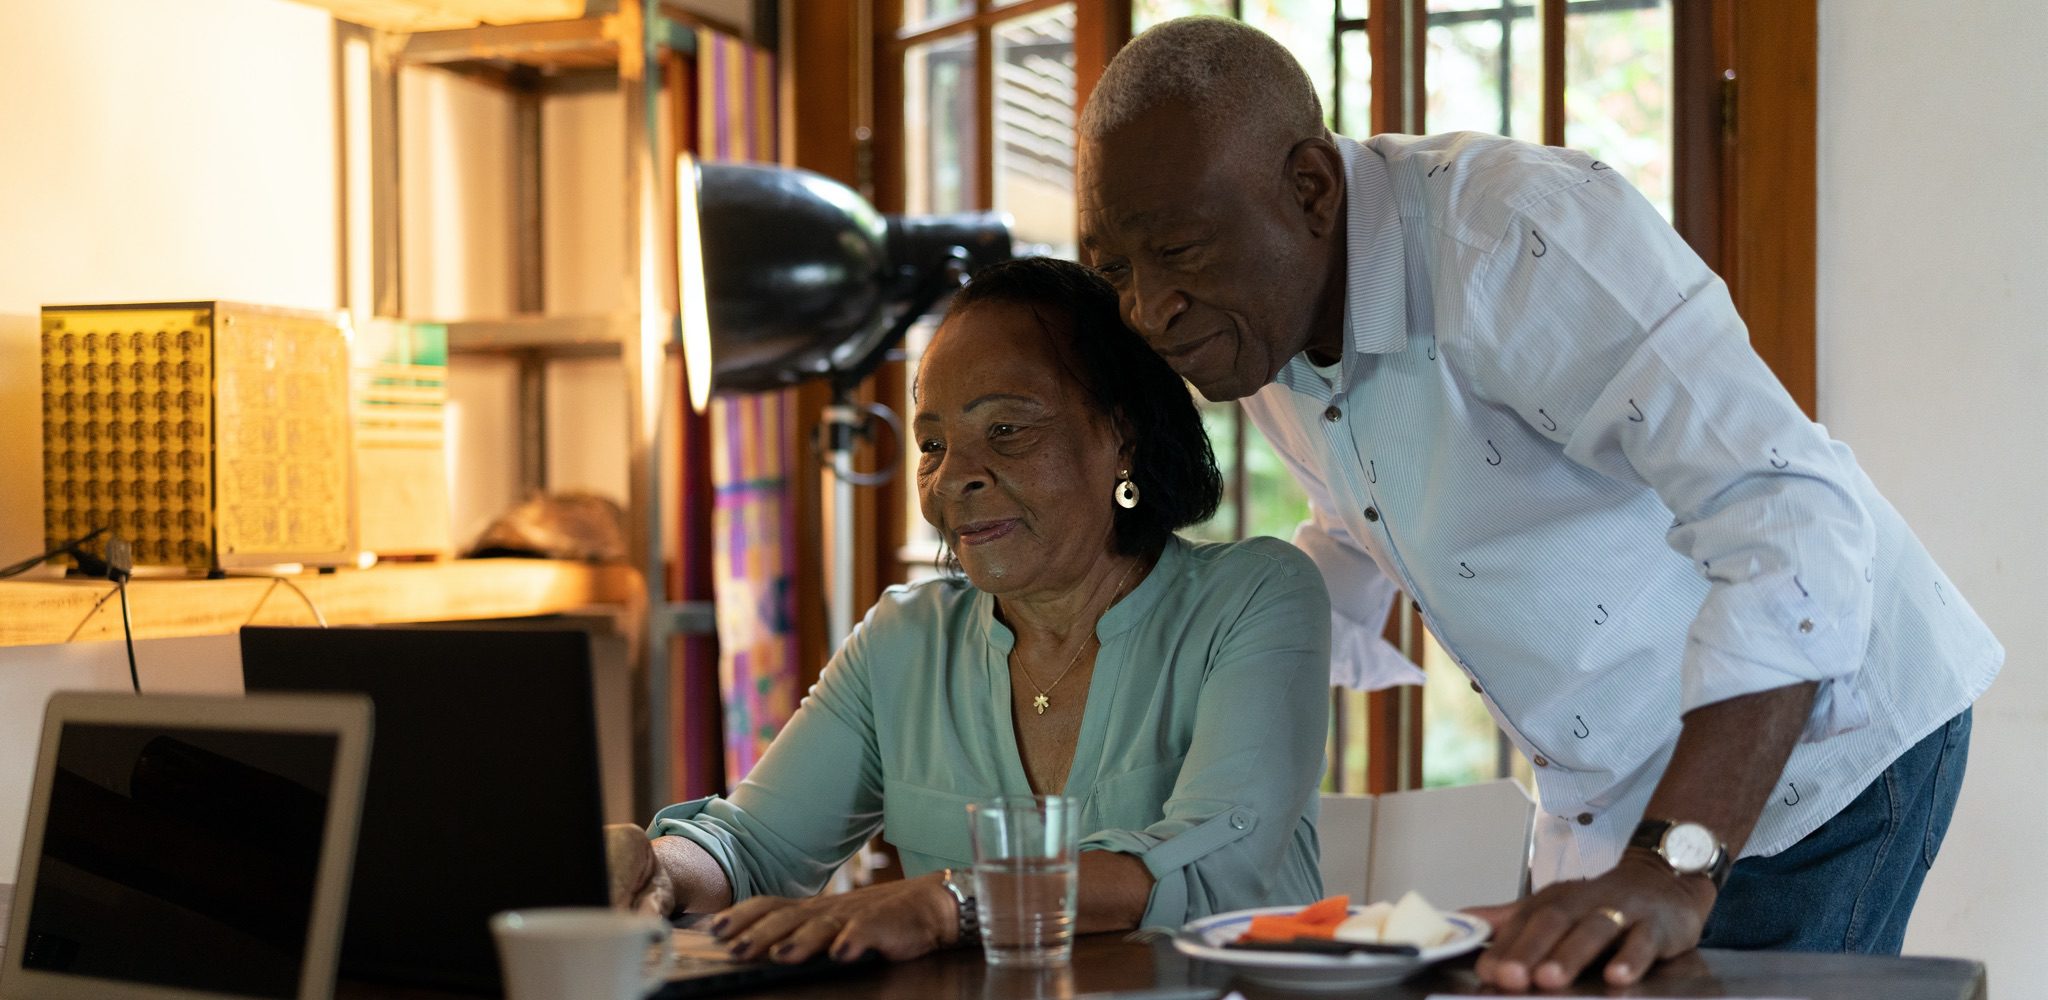 Senior African-American couple looking at computer.